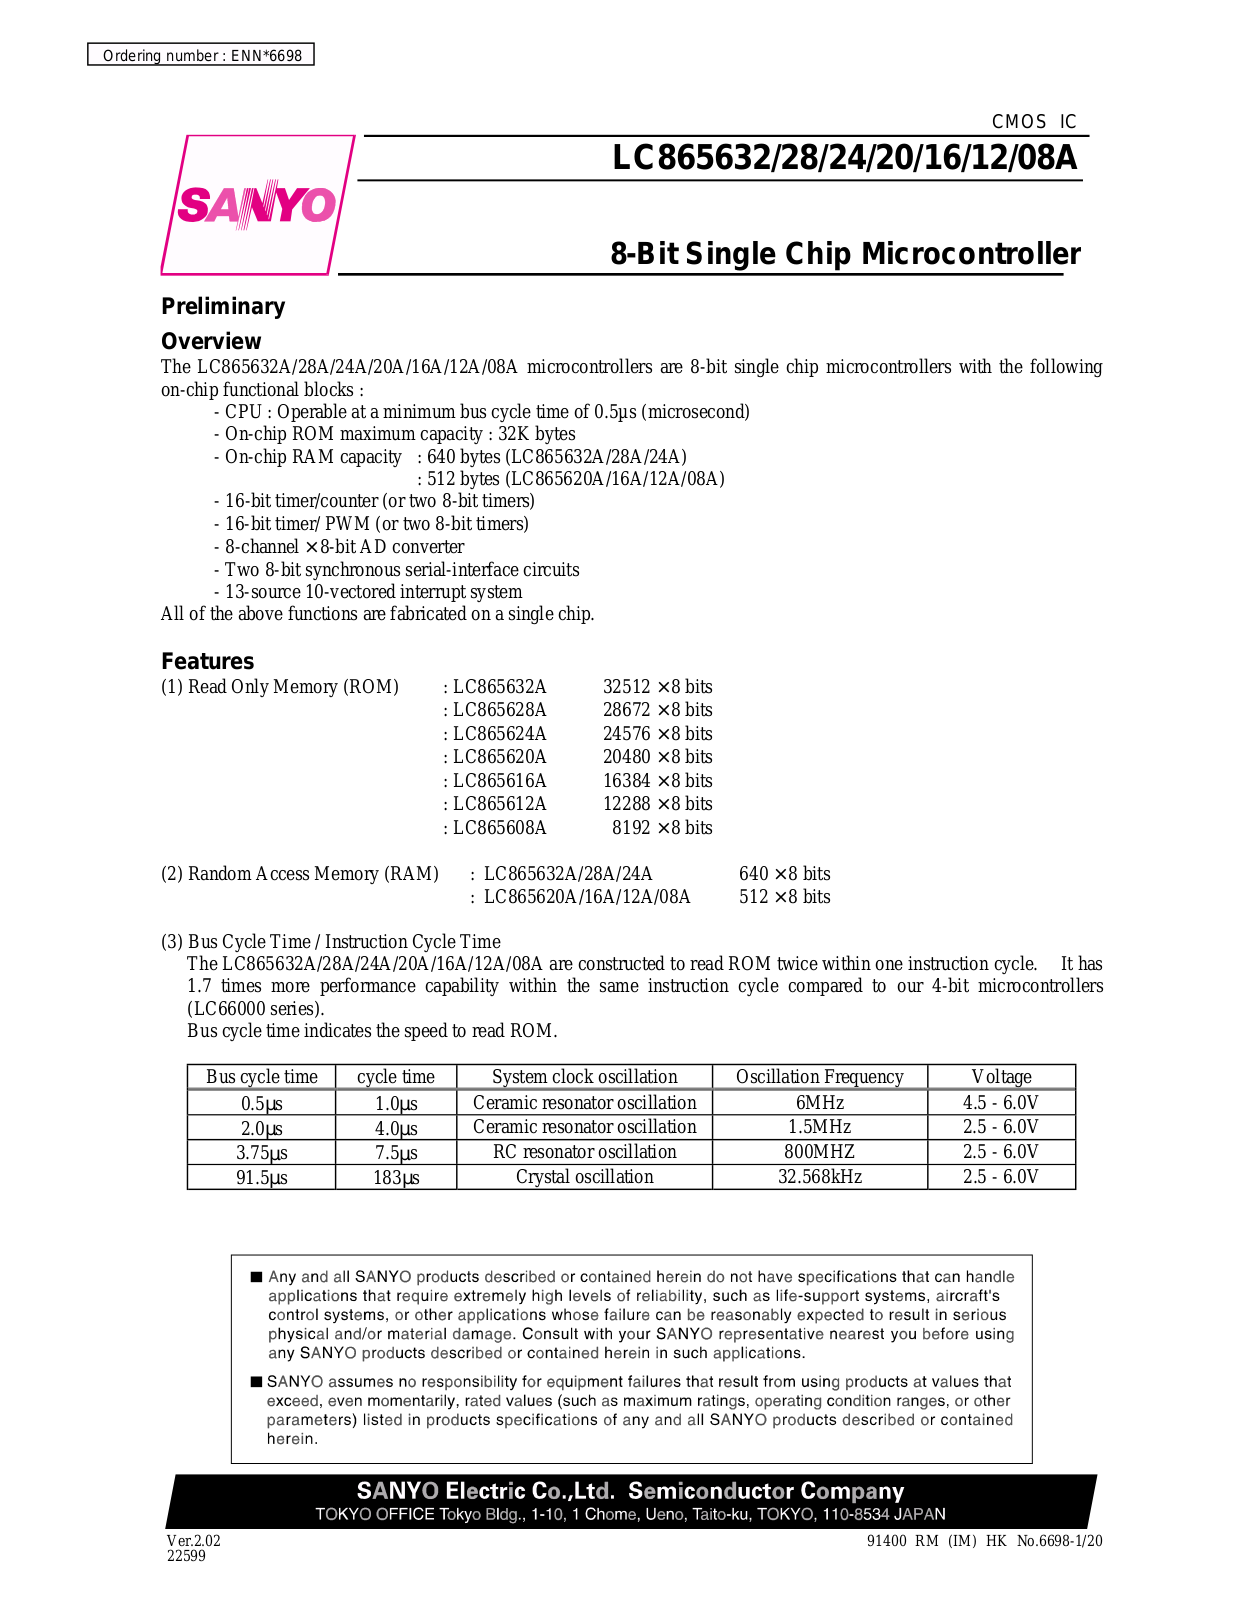 SANYO LC865632A, LC865628A, LC865624A, LC865620A, LC865608A Datasheet